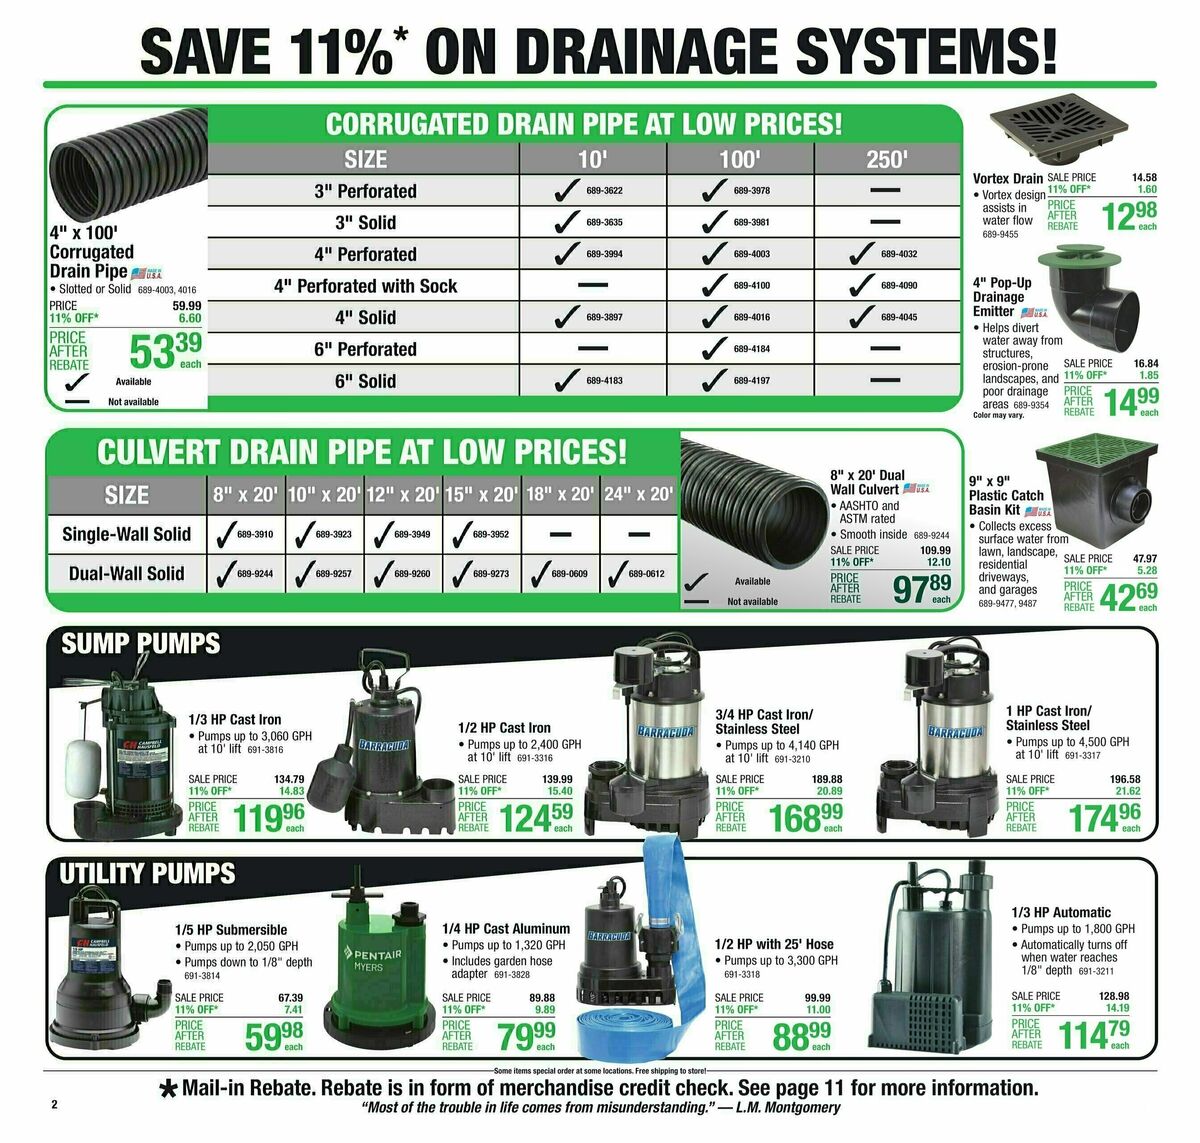 Menards Weekly Ad from August 9